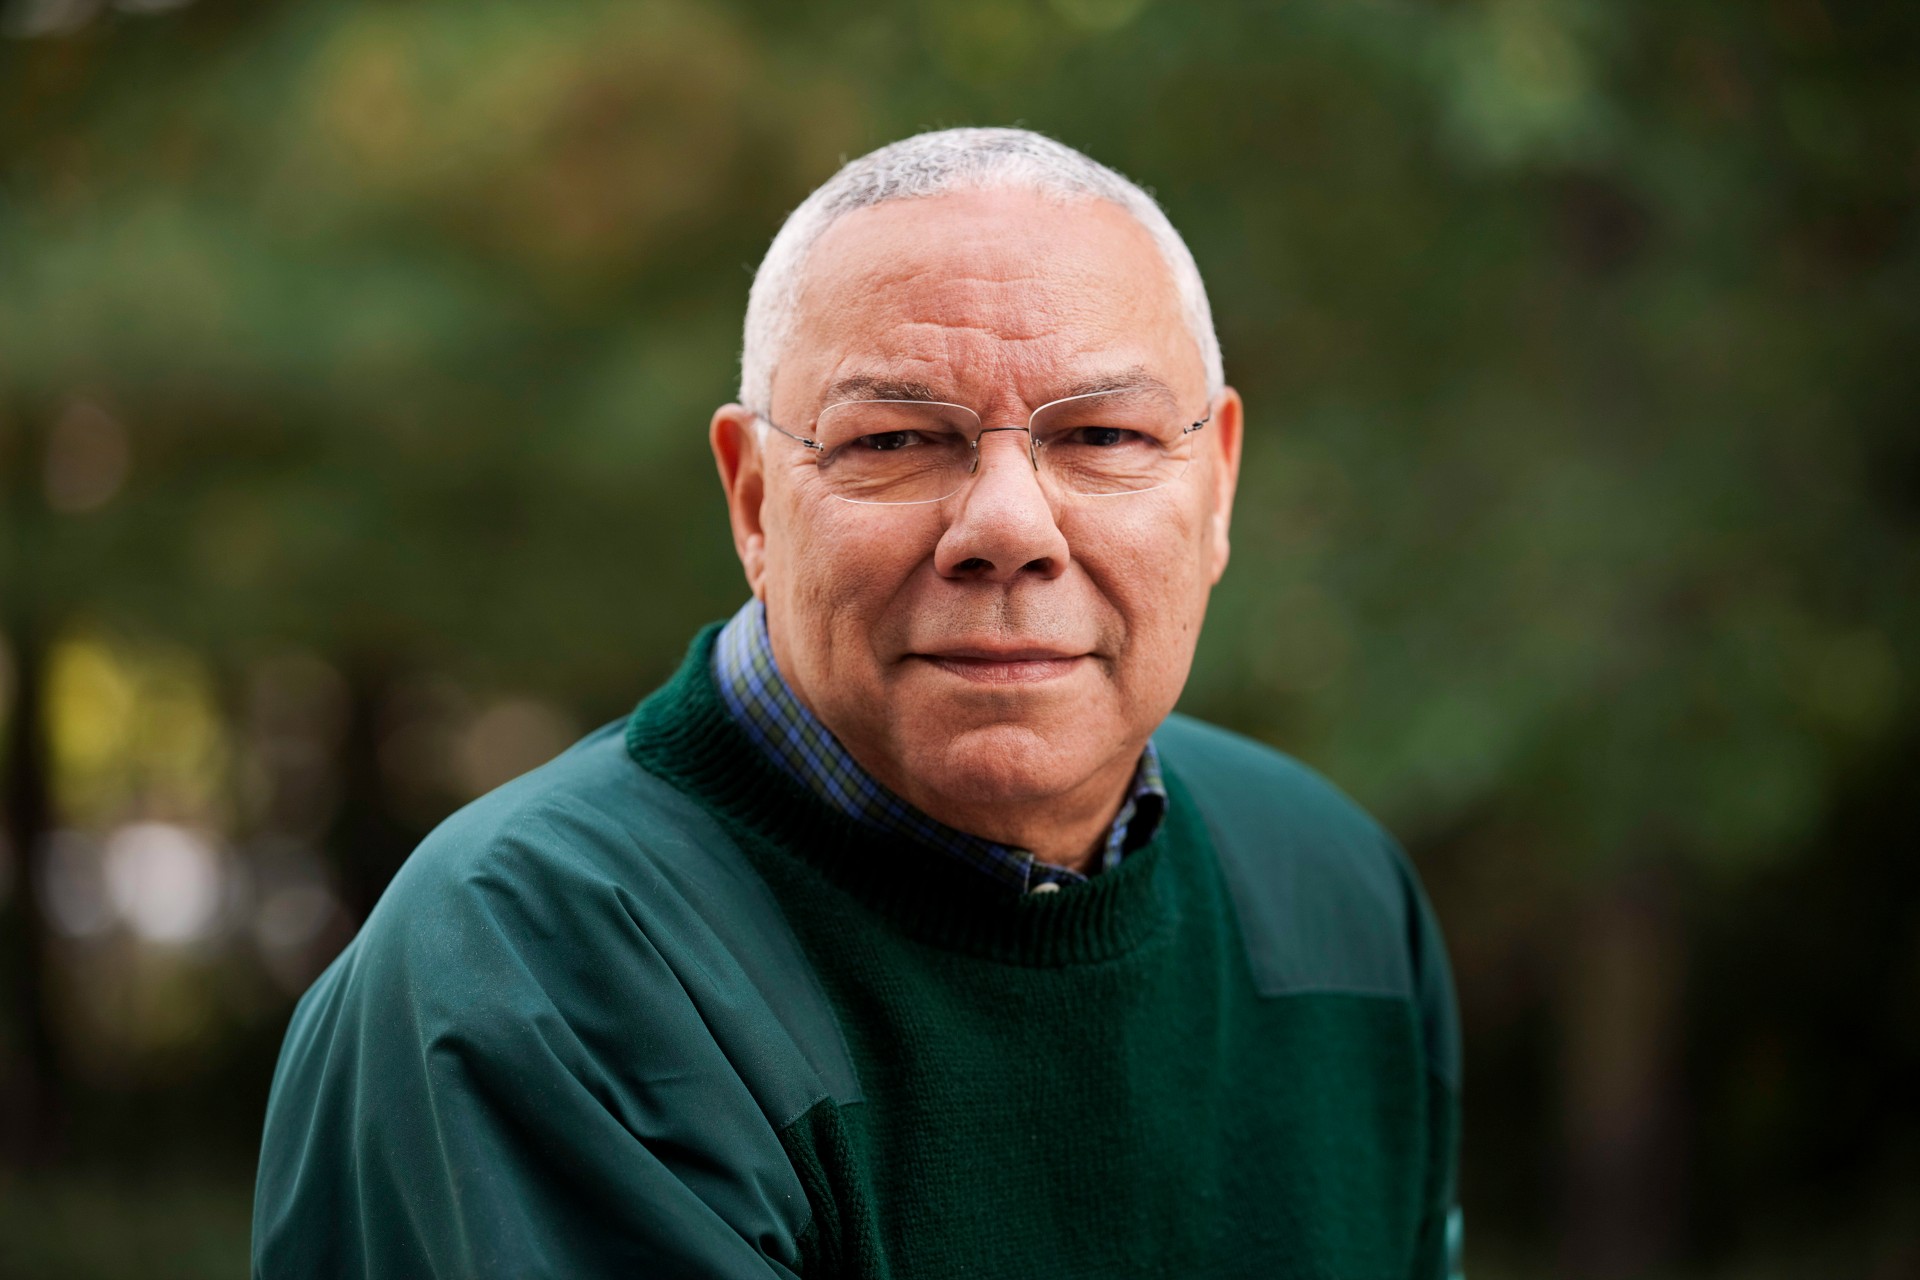 Colin Powell smiles while wearing a green shirt. 